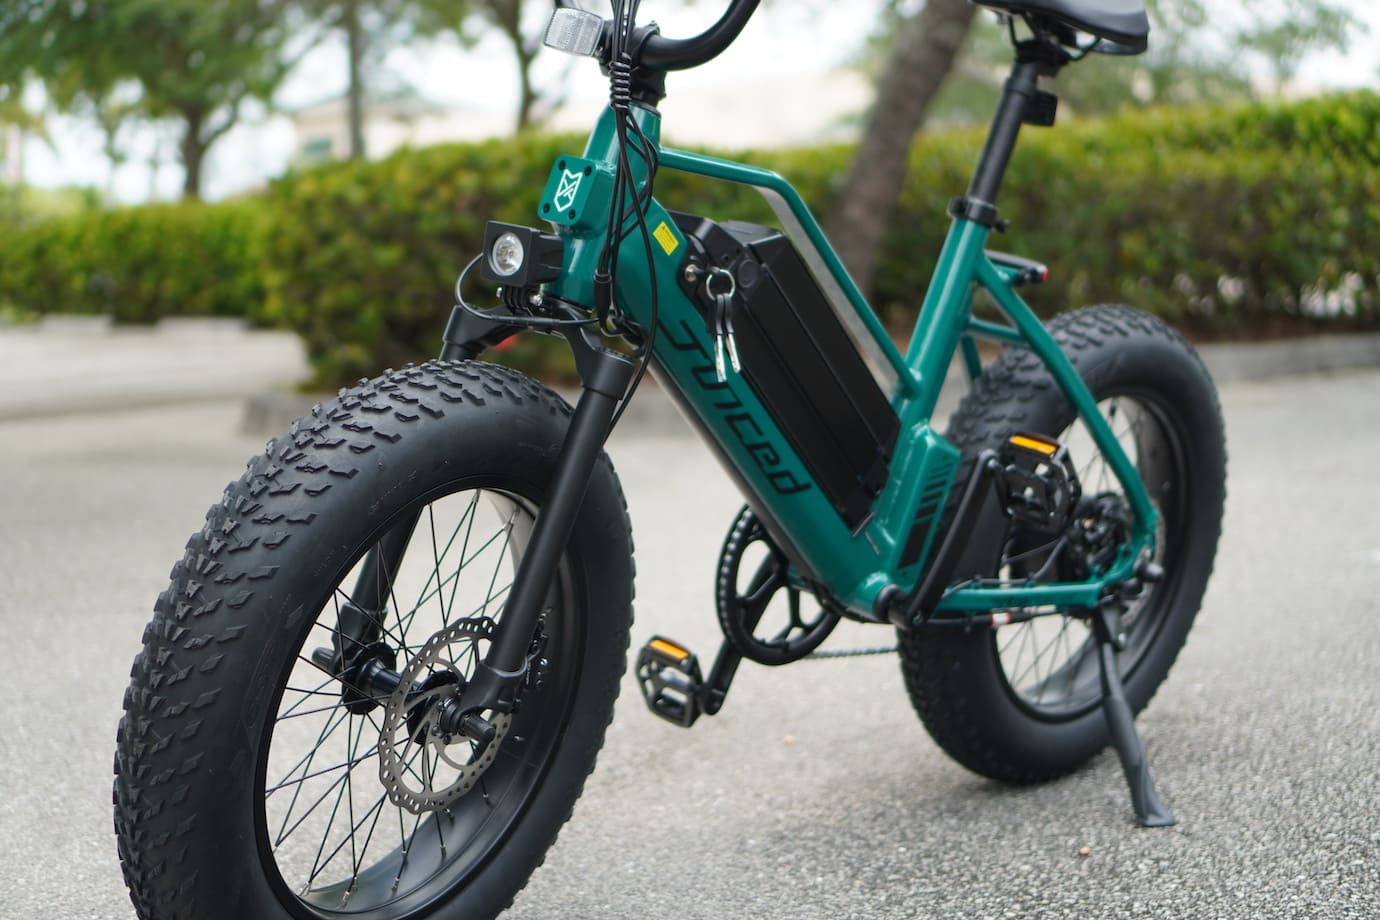 Juiced RipRacer review: This fat-tire electric bike is the perfect size